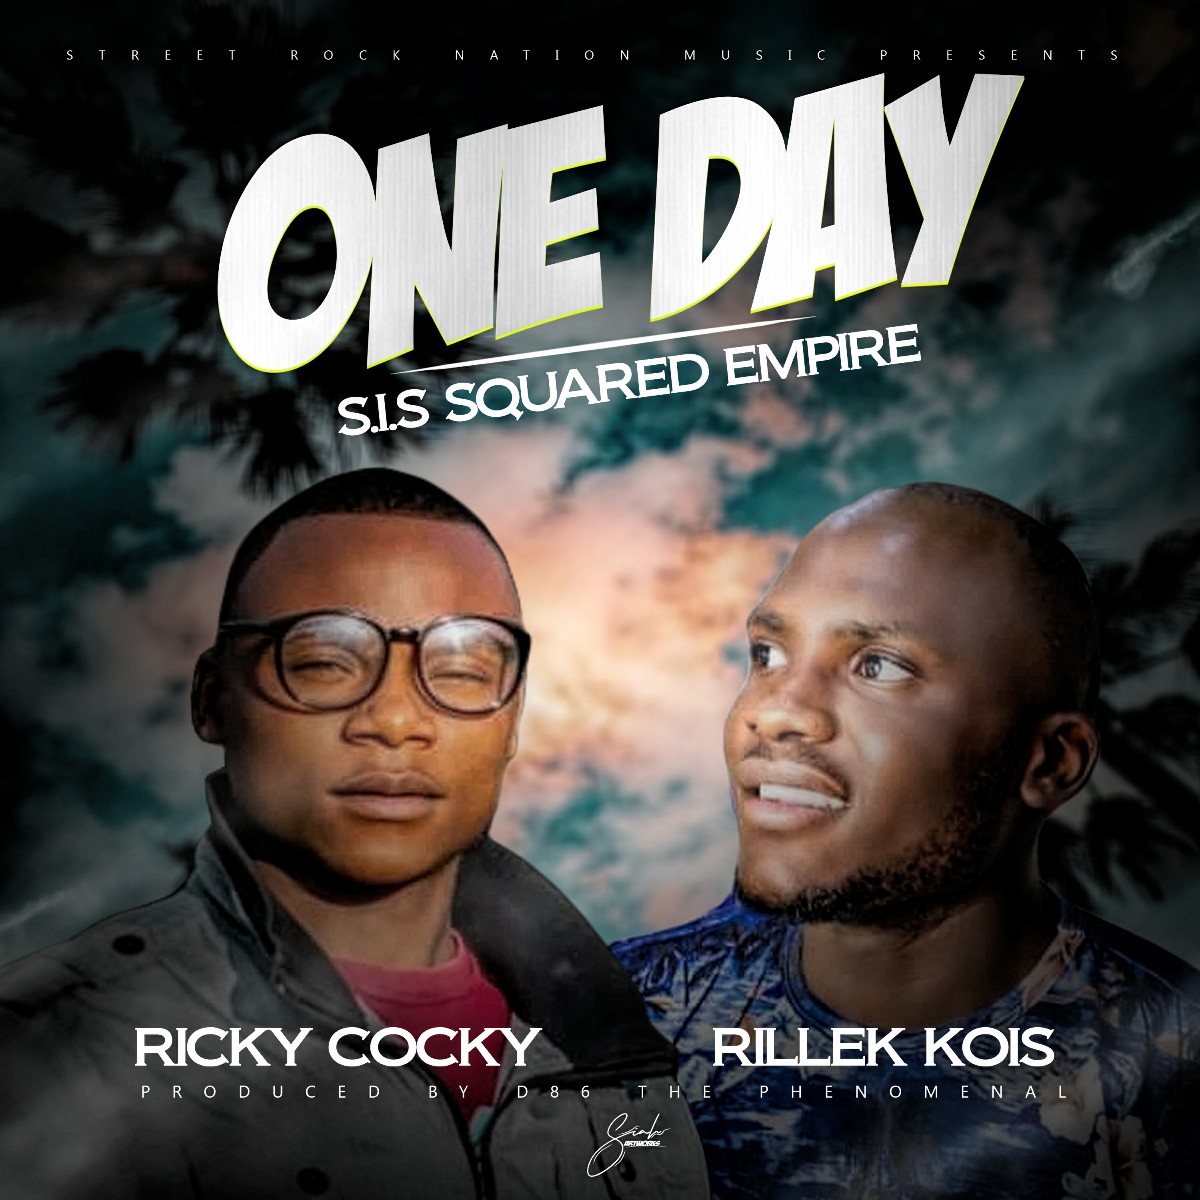 S.I.S Squared Empire - One Day